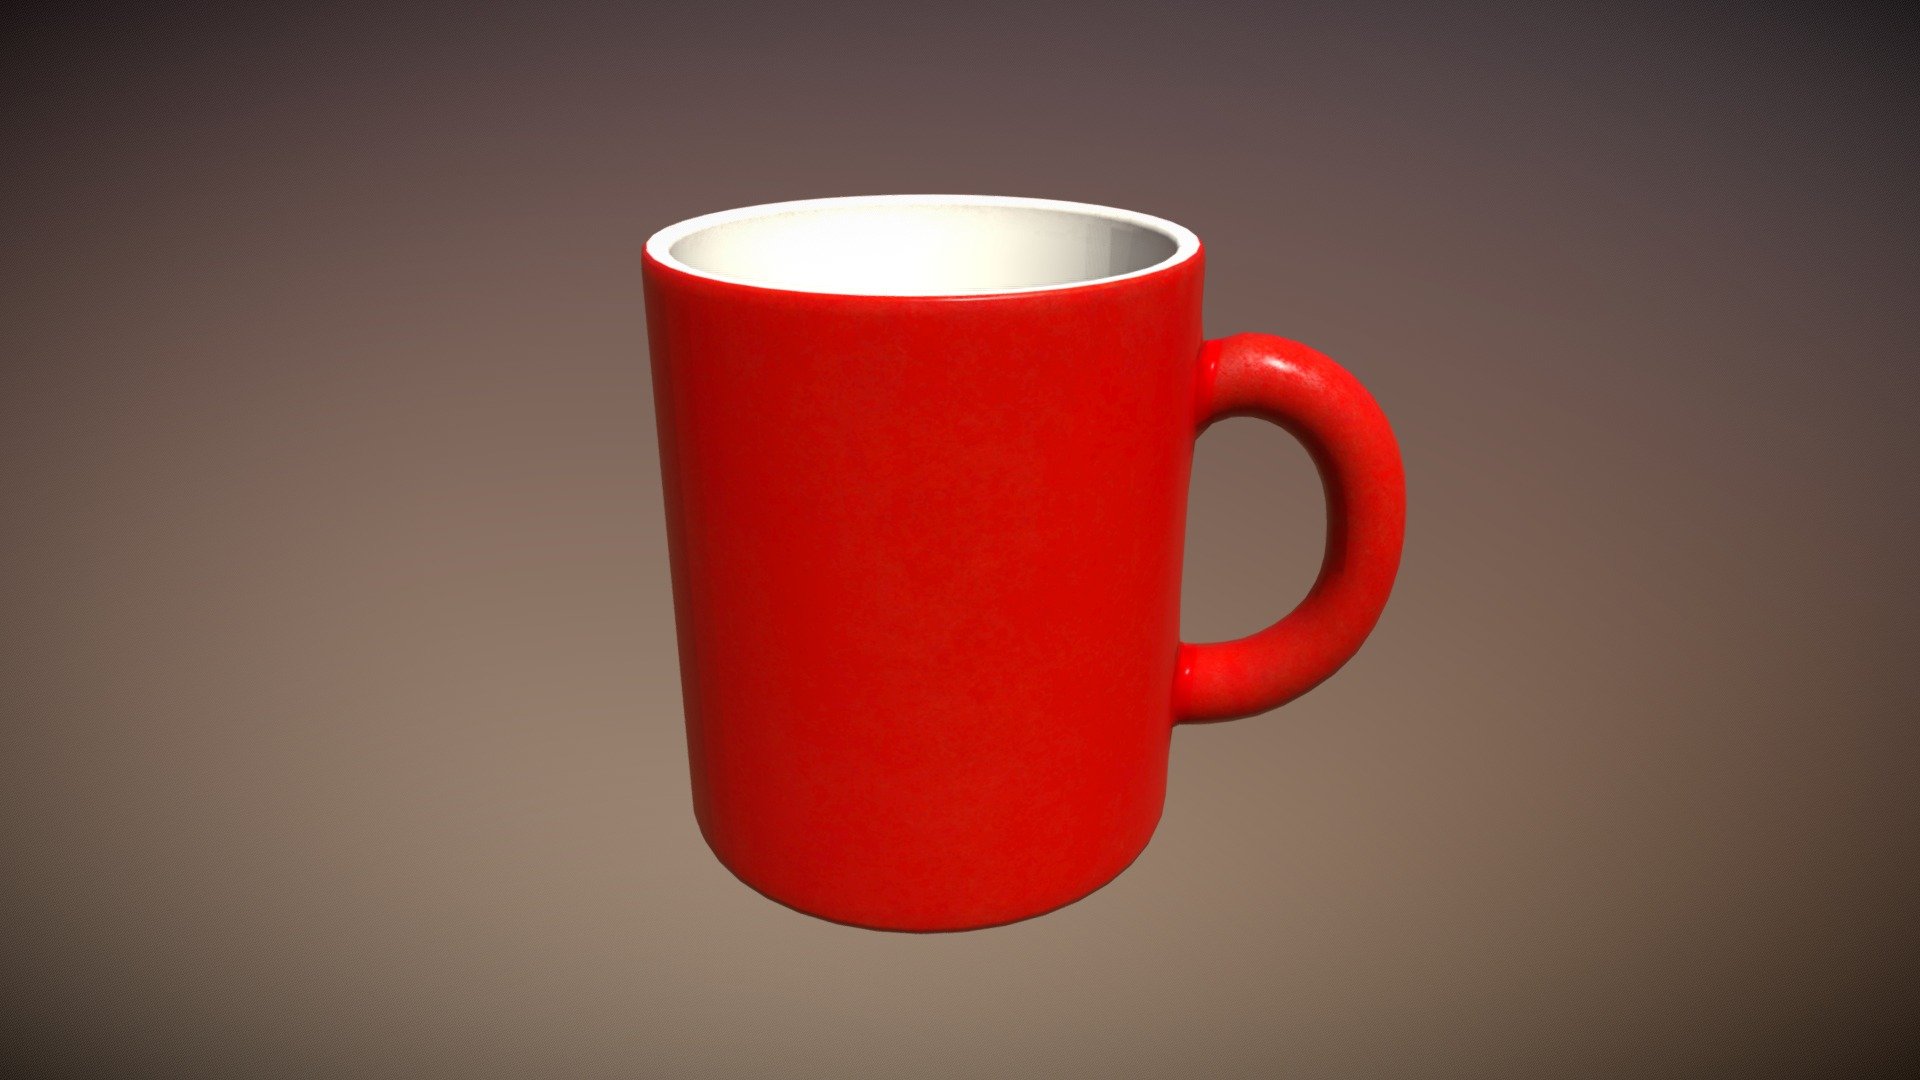 Just simplest ceramic mug for hot tea.

Features:


Red
Simple
Big
Little dirty

(it’s my first upload on sketchfab) - Mug - Download Free 3D model by mvodya 3d model